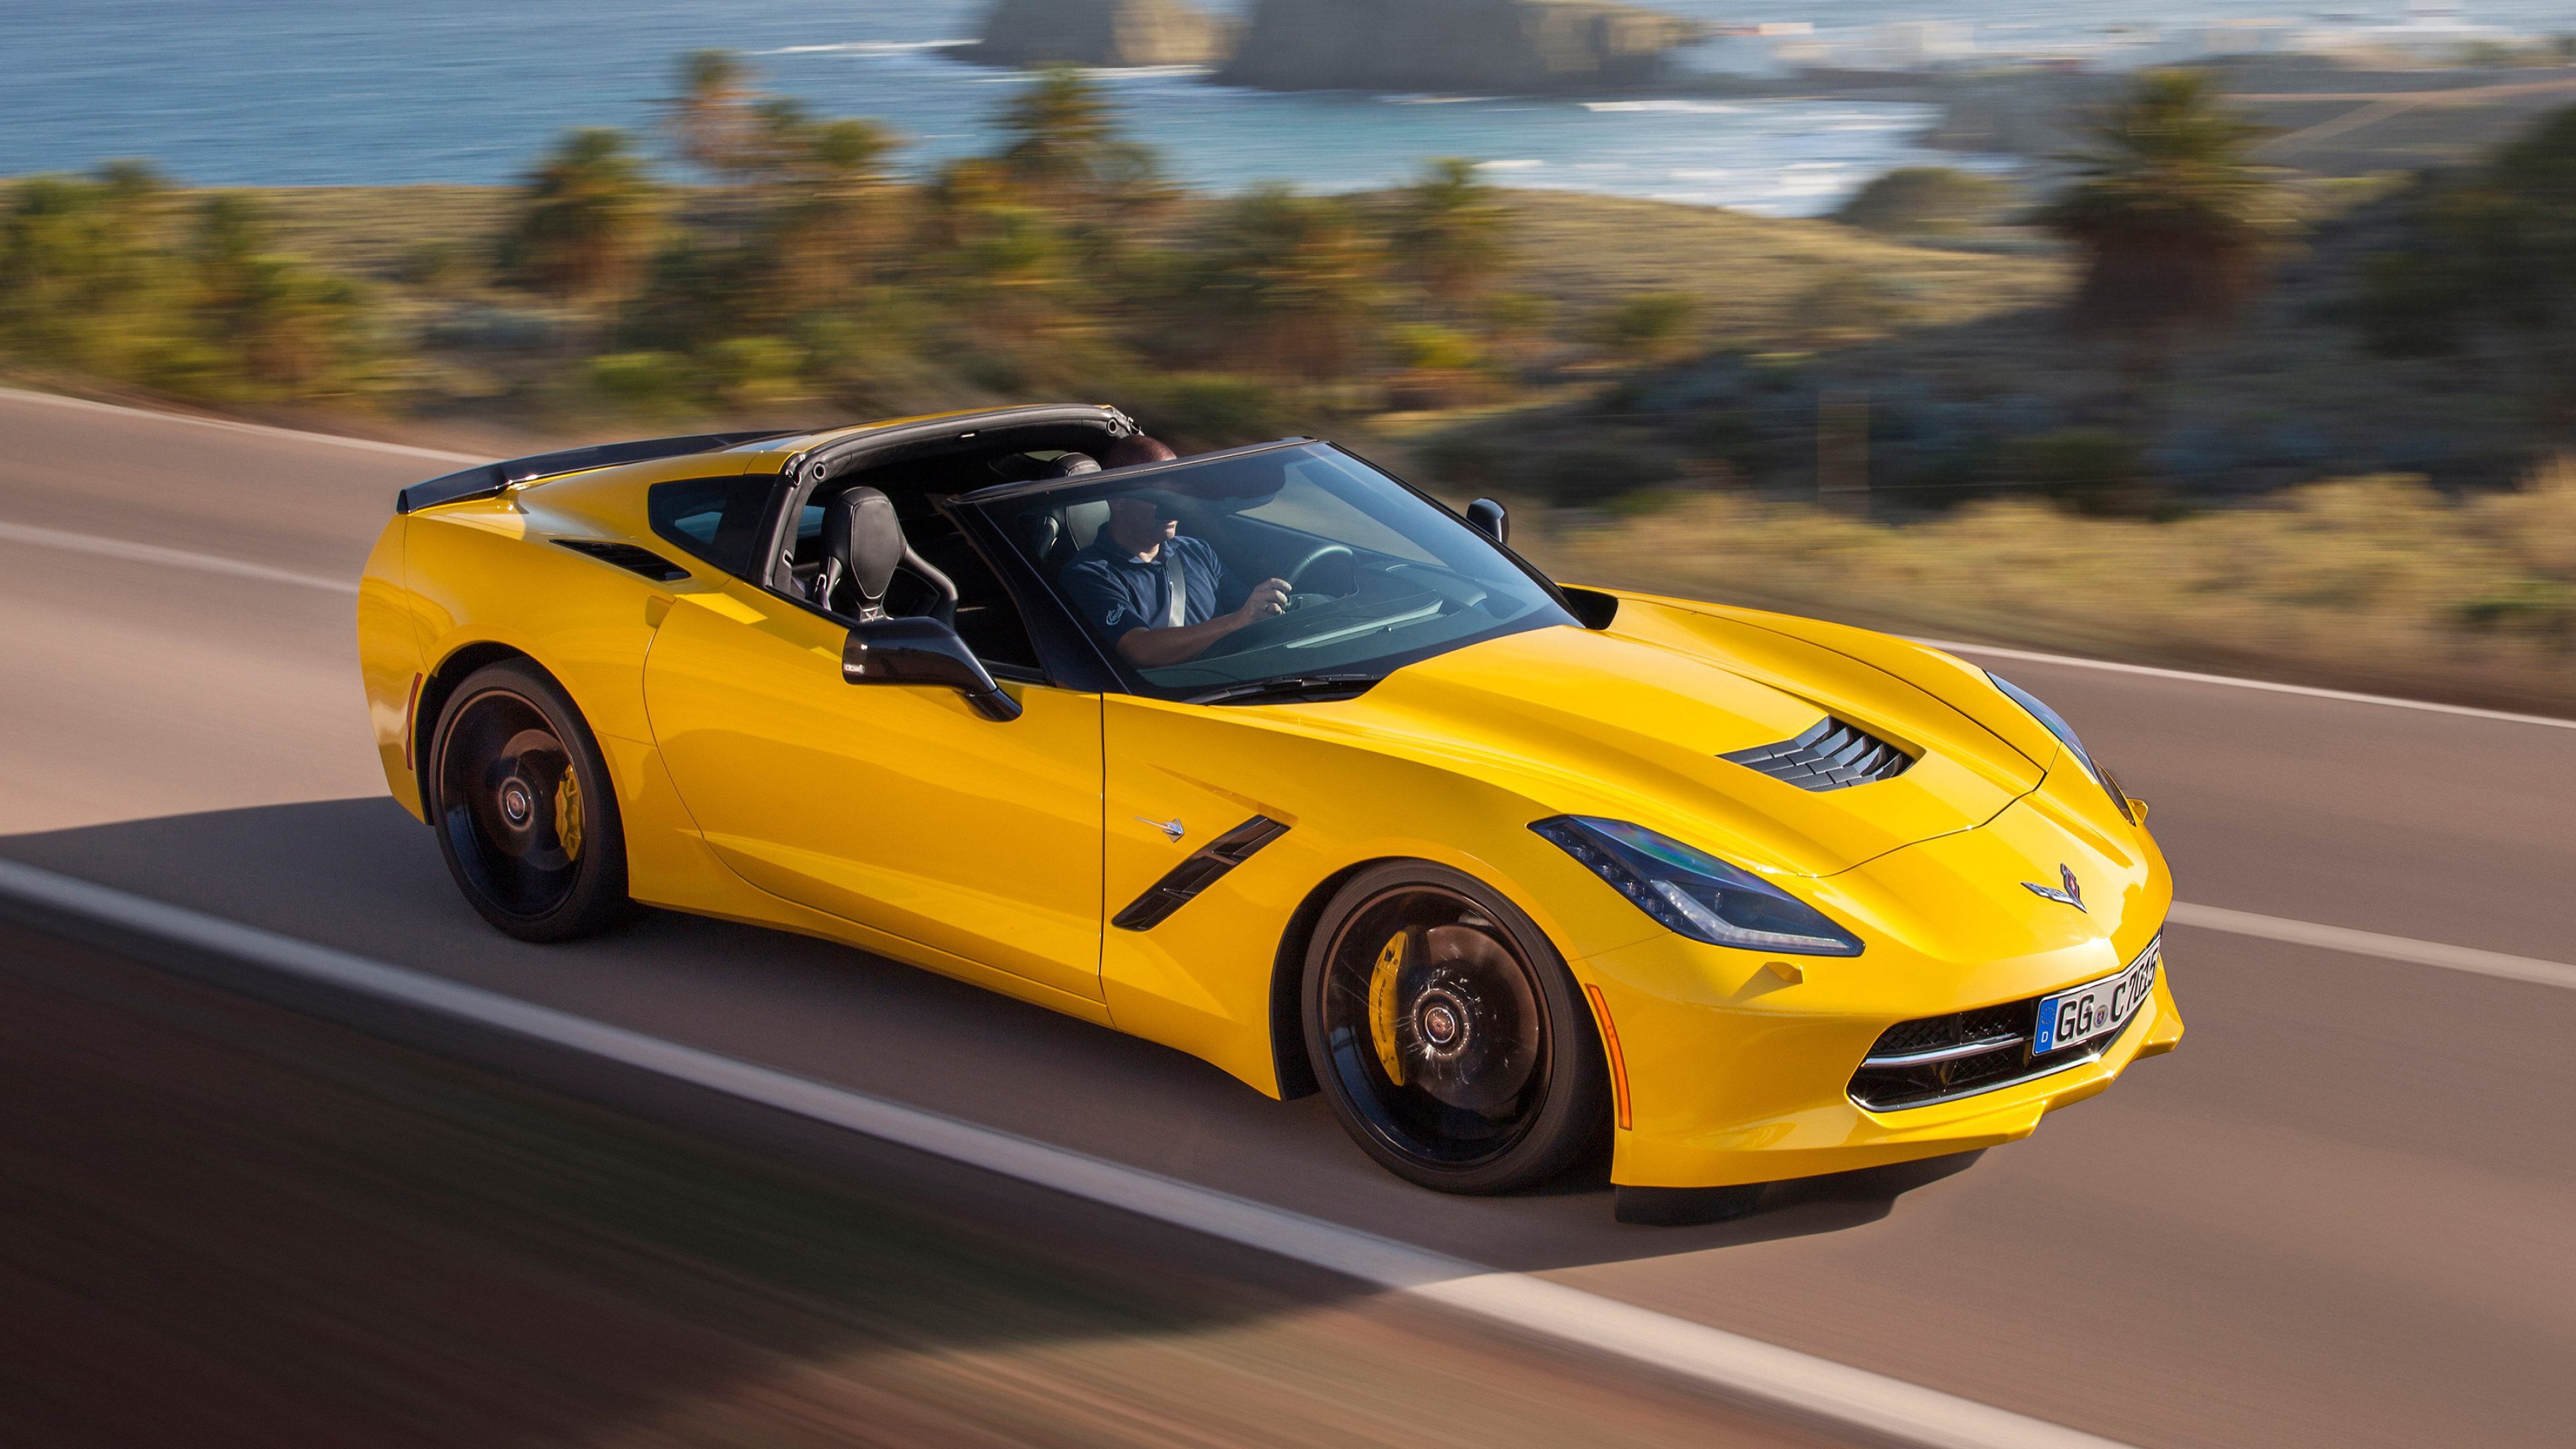 Corvette: ZR1 C7 two-door convertible, Cabriolet version, Sports car for traveling, West Coast of the US. 3840x2160 4K Wallpaper.